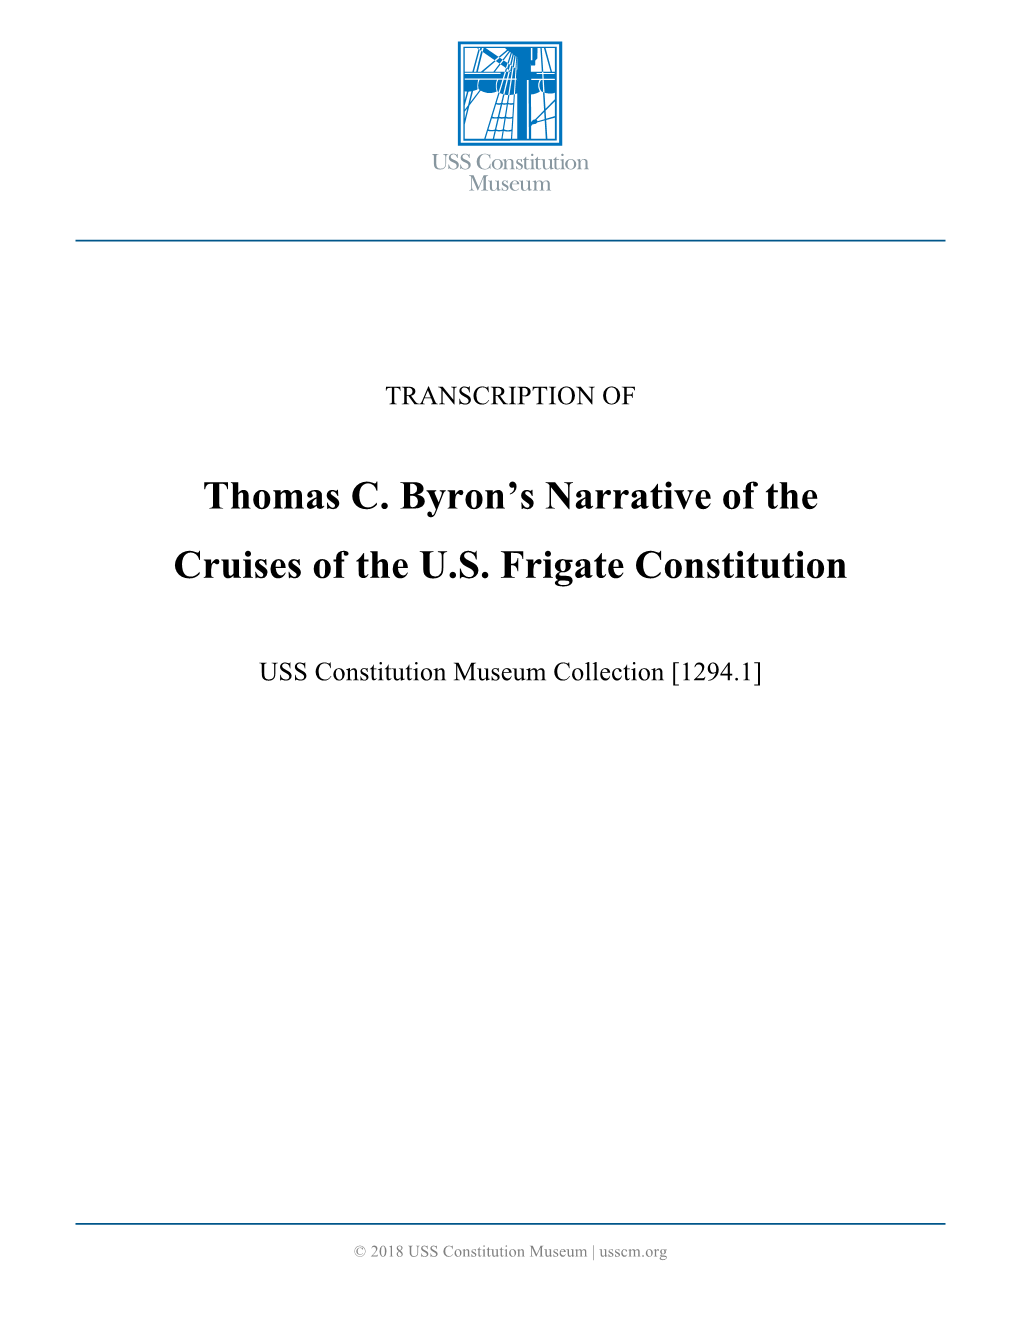 Thomas C. Byron's Narrative of the Cruises of the U.S. Frigate Constitution USS Constitution Museum Collection [1294.1] © 2018 USS Constitution Museum